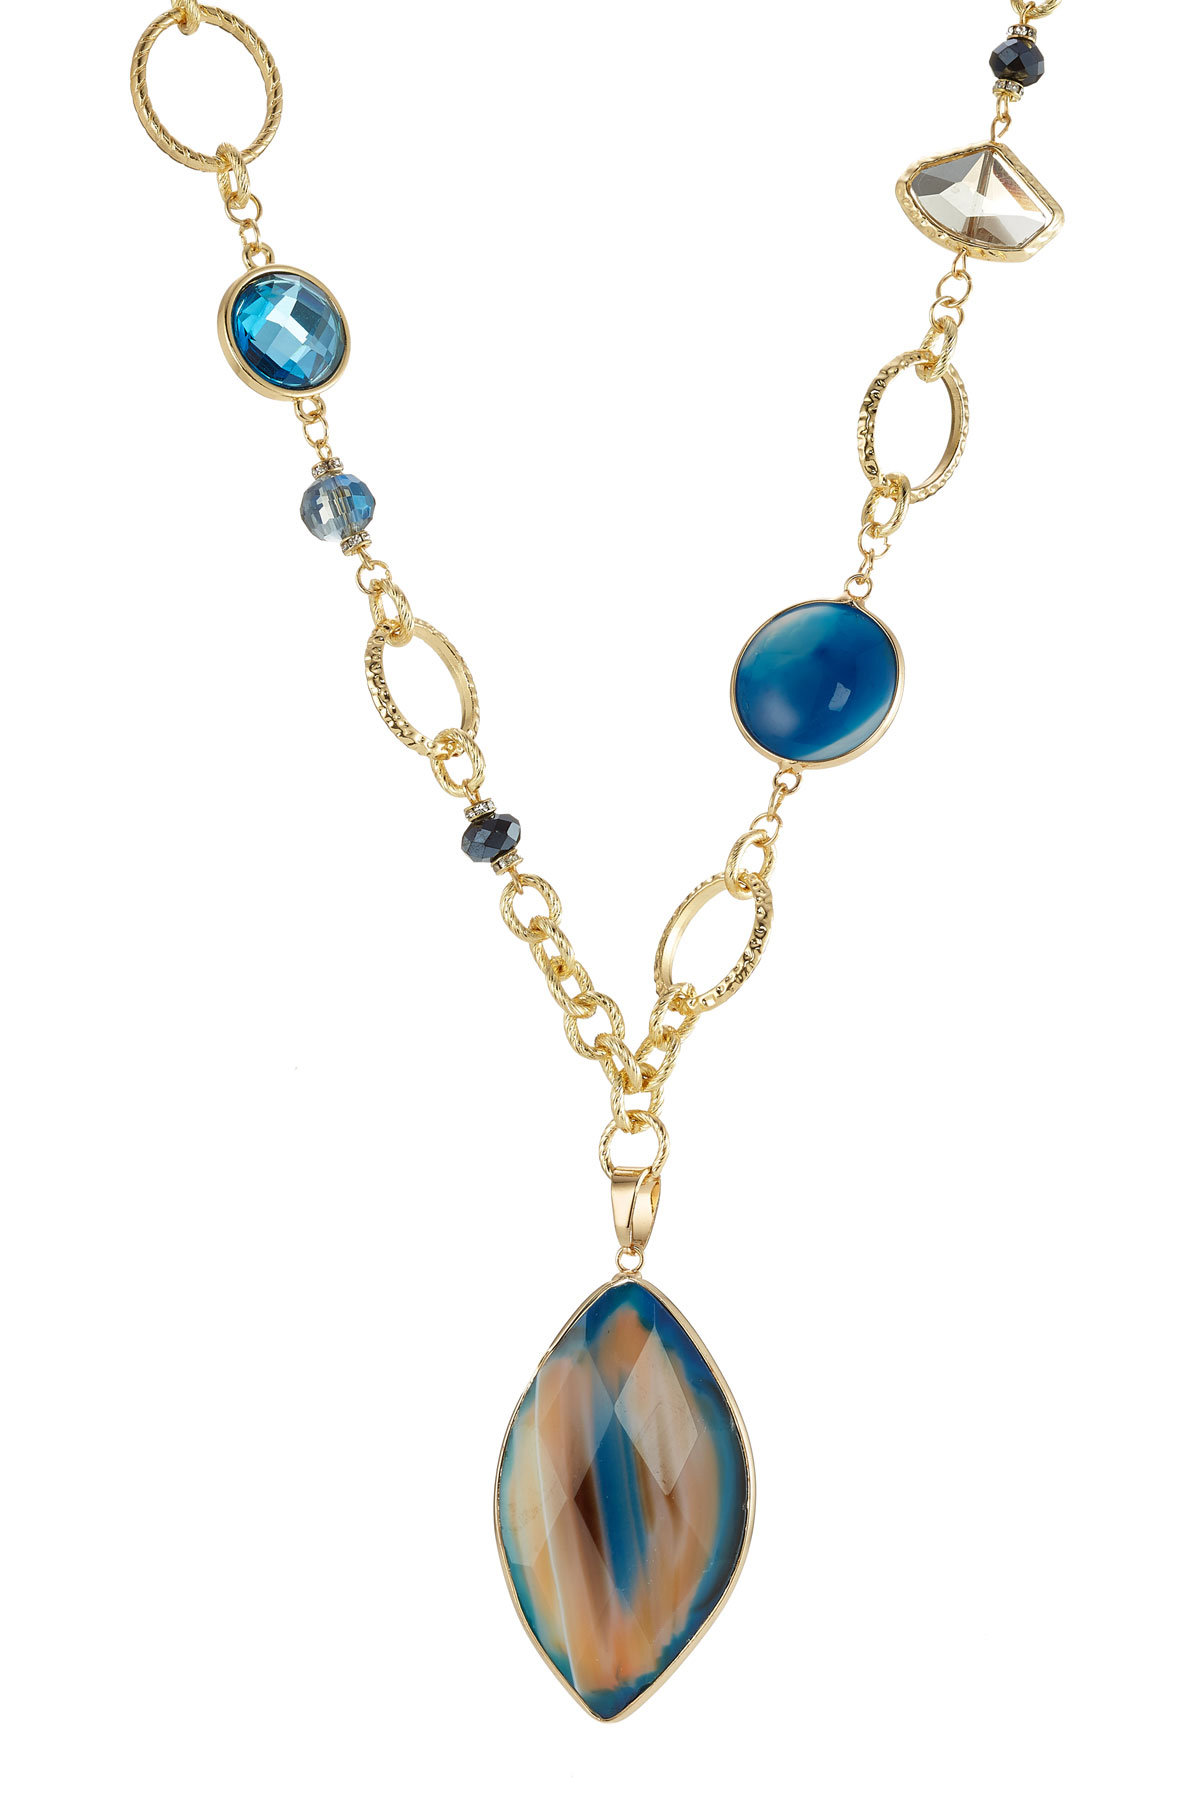 Gilded Necklace with Faceted Stones by Kenneth Jay Lane